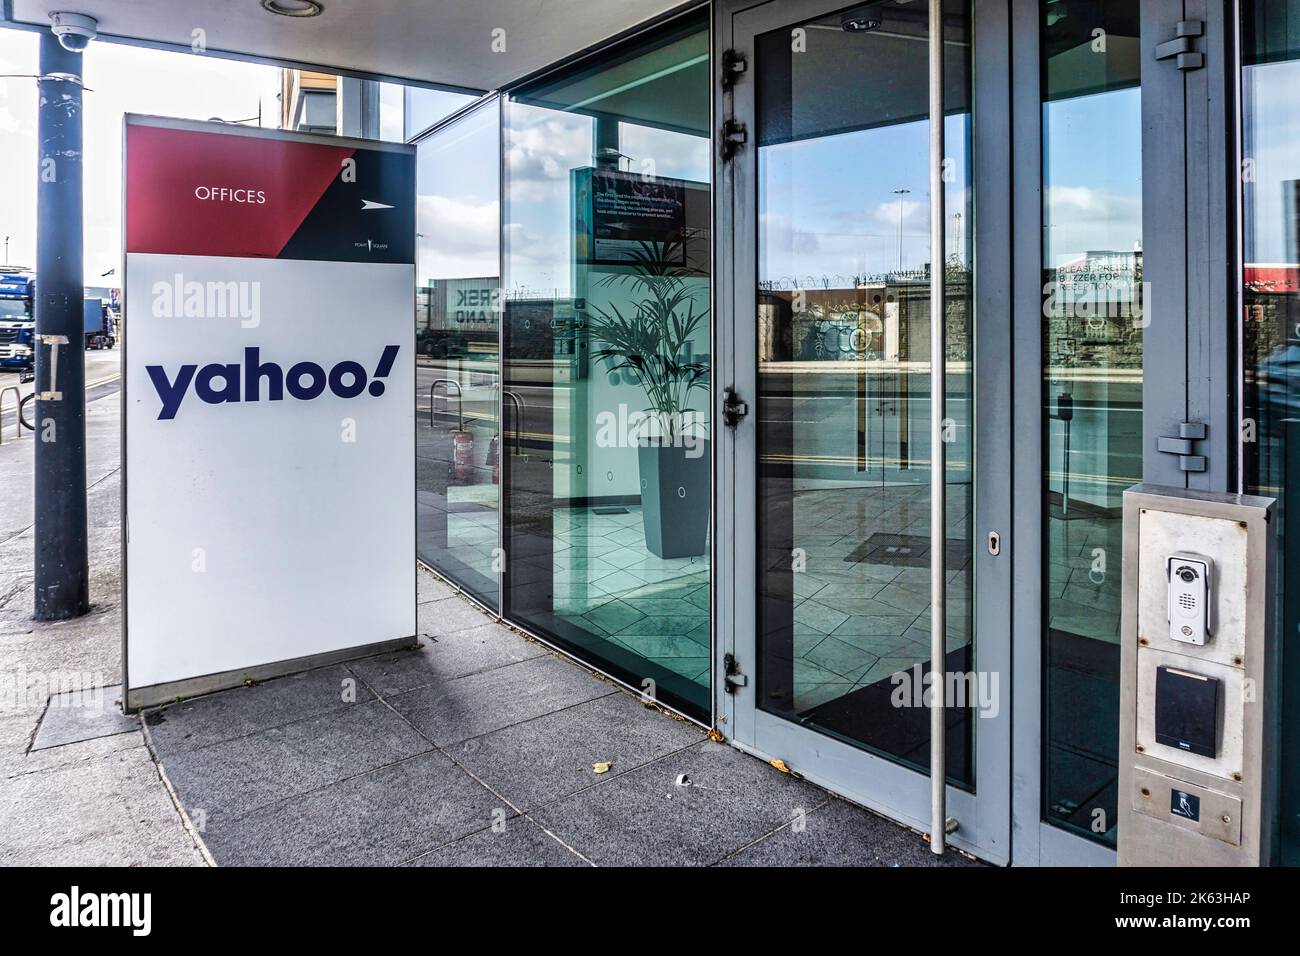 The offices of Yahoo, at Point Square, East Wall, Dublin, Ireland. Stock Photo